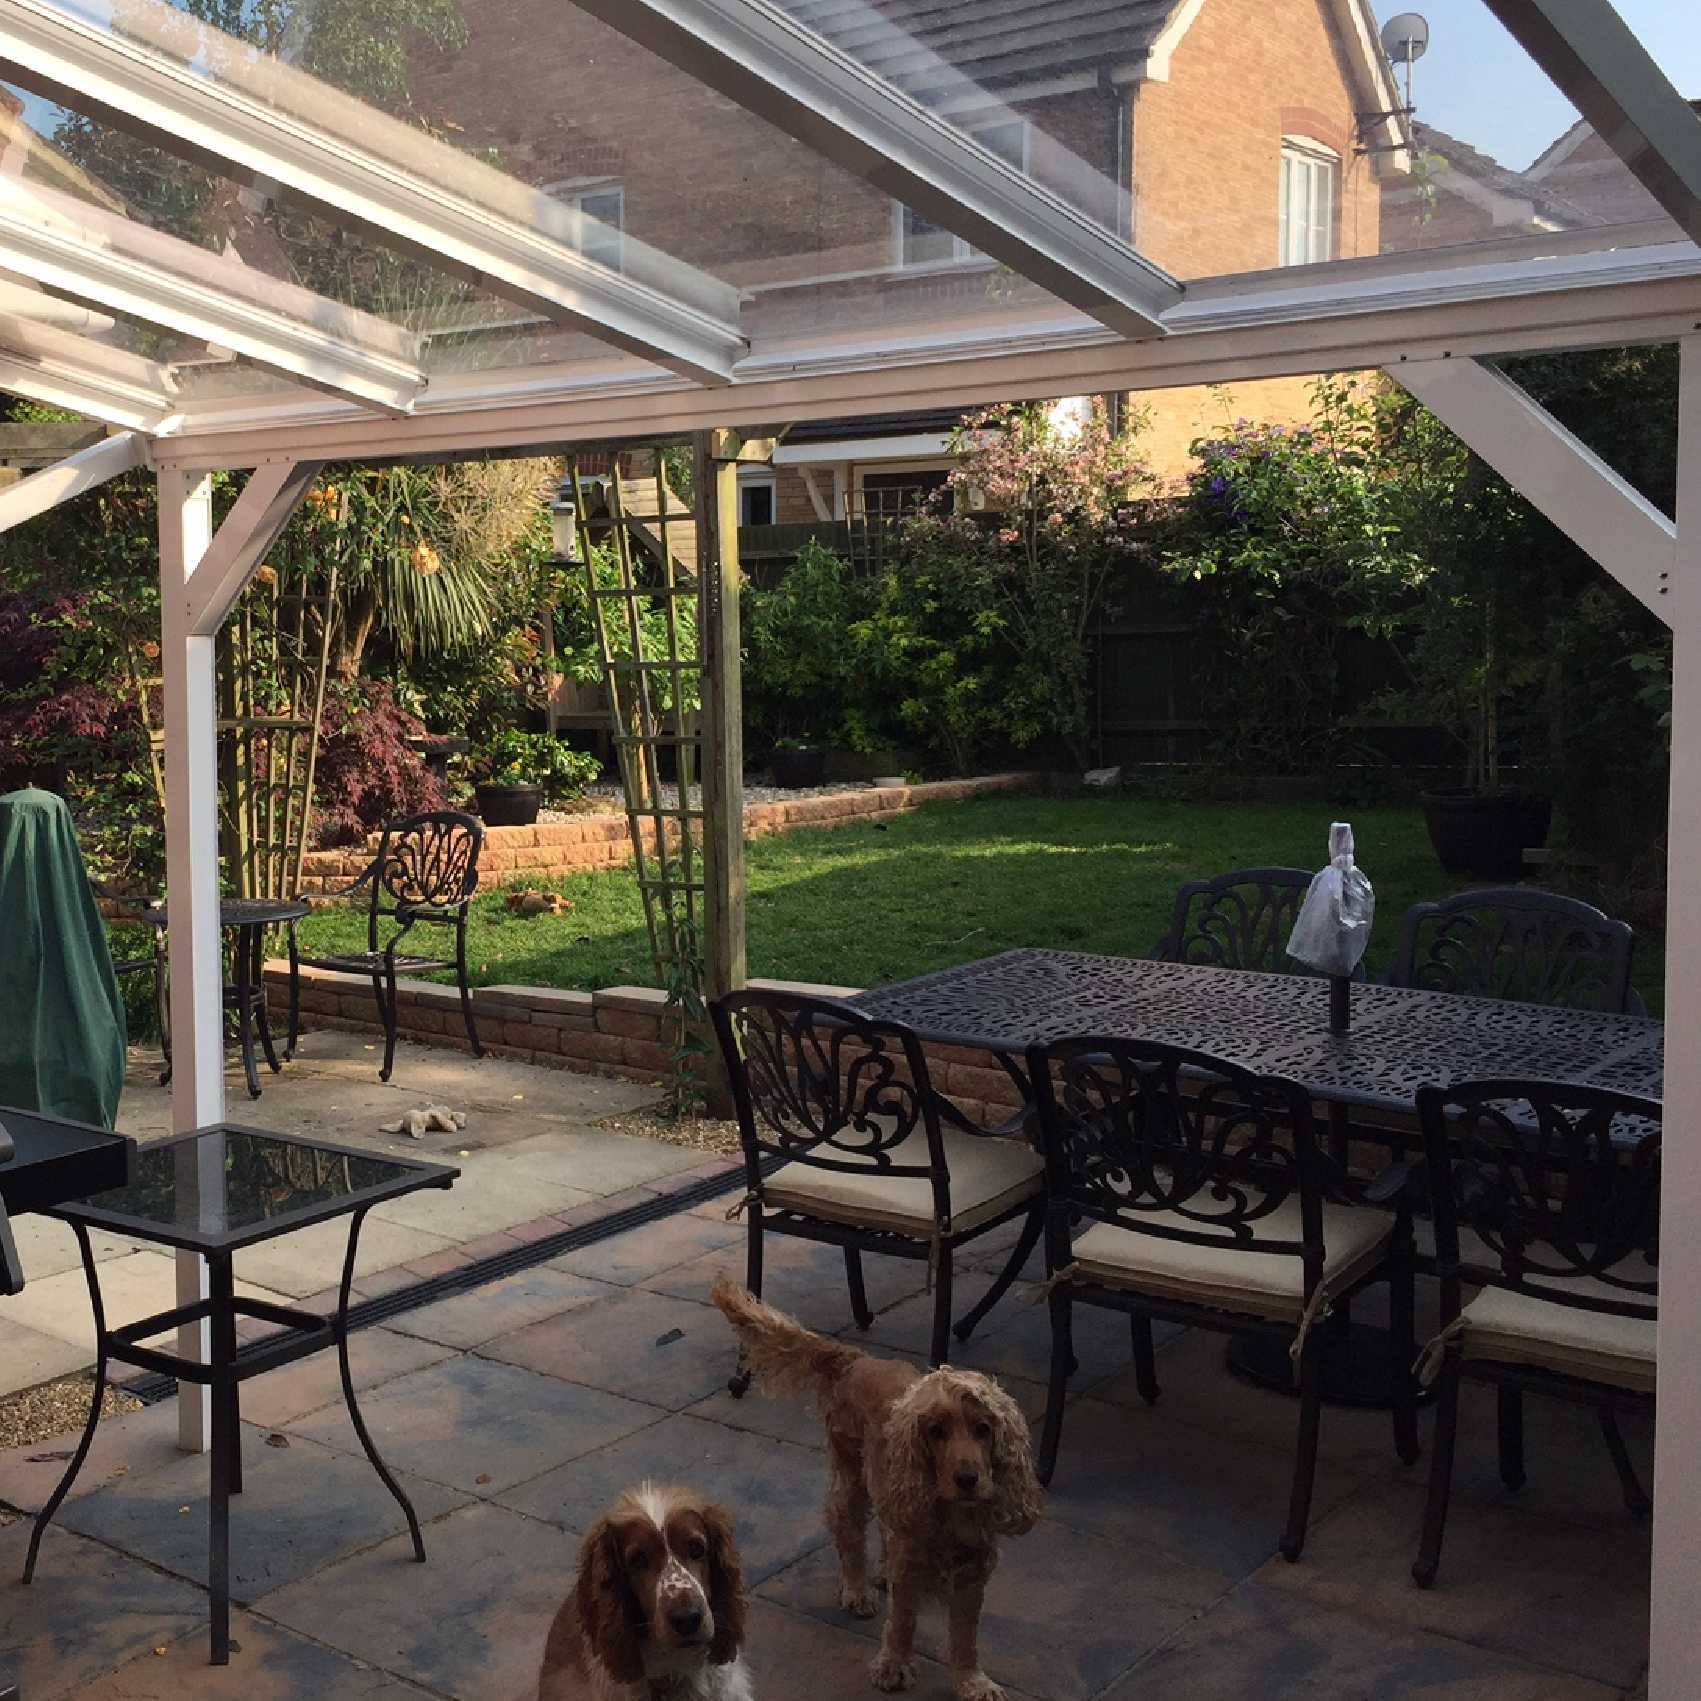 Affordable Omega Smart Lean-To Canopy, White UNGLAZED for 6mm Glazing - 2.8m (W) x 2.0m (P), (2) Supporting Posts